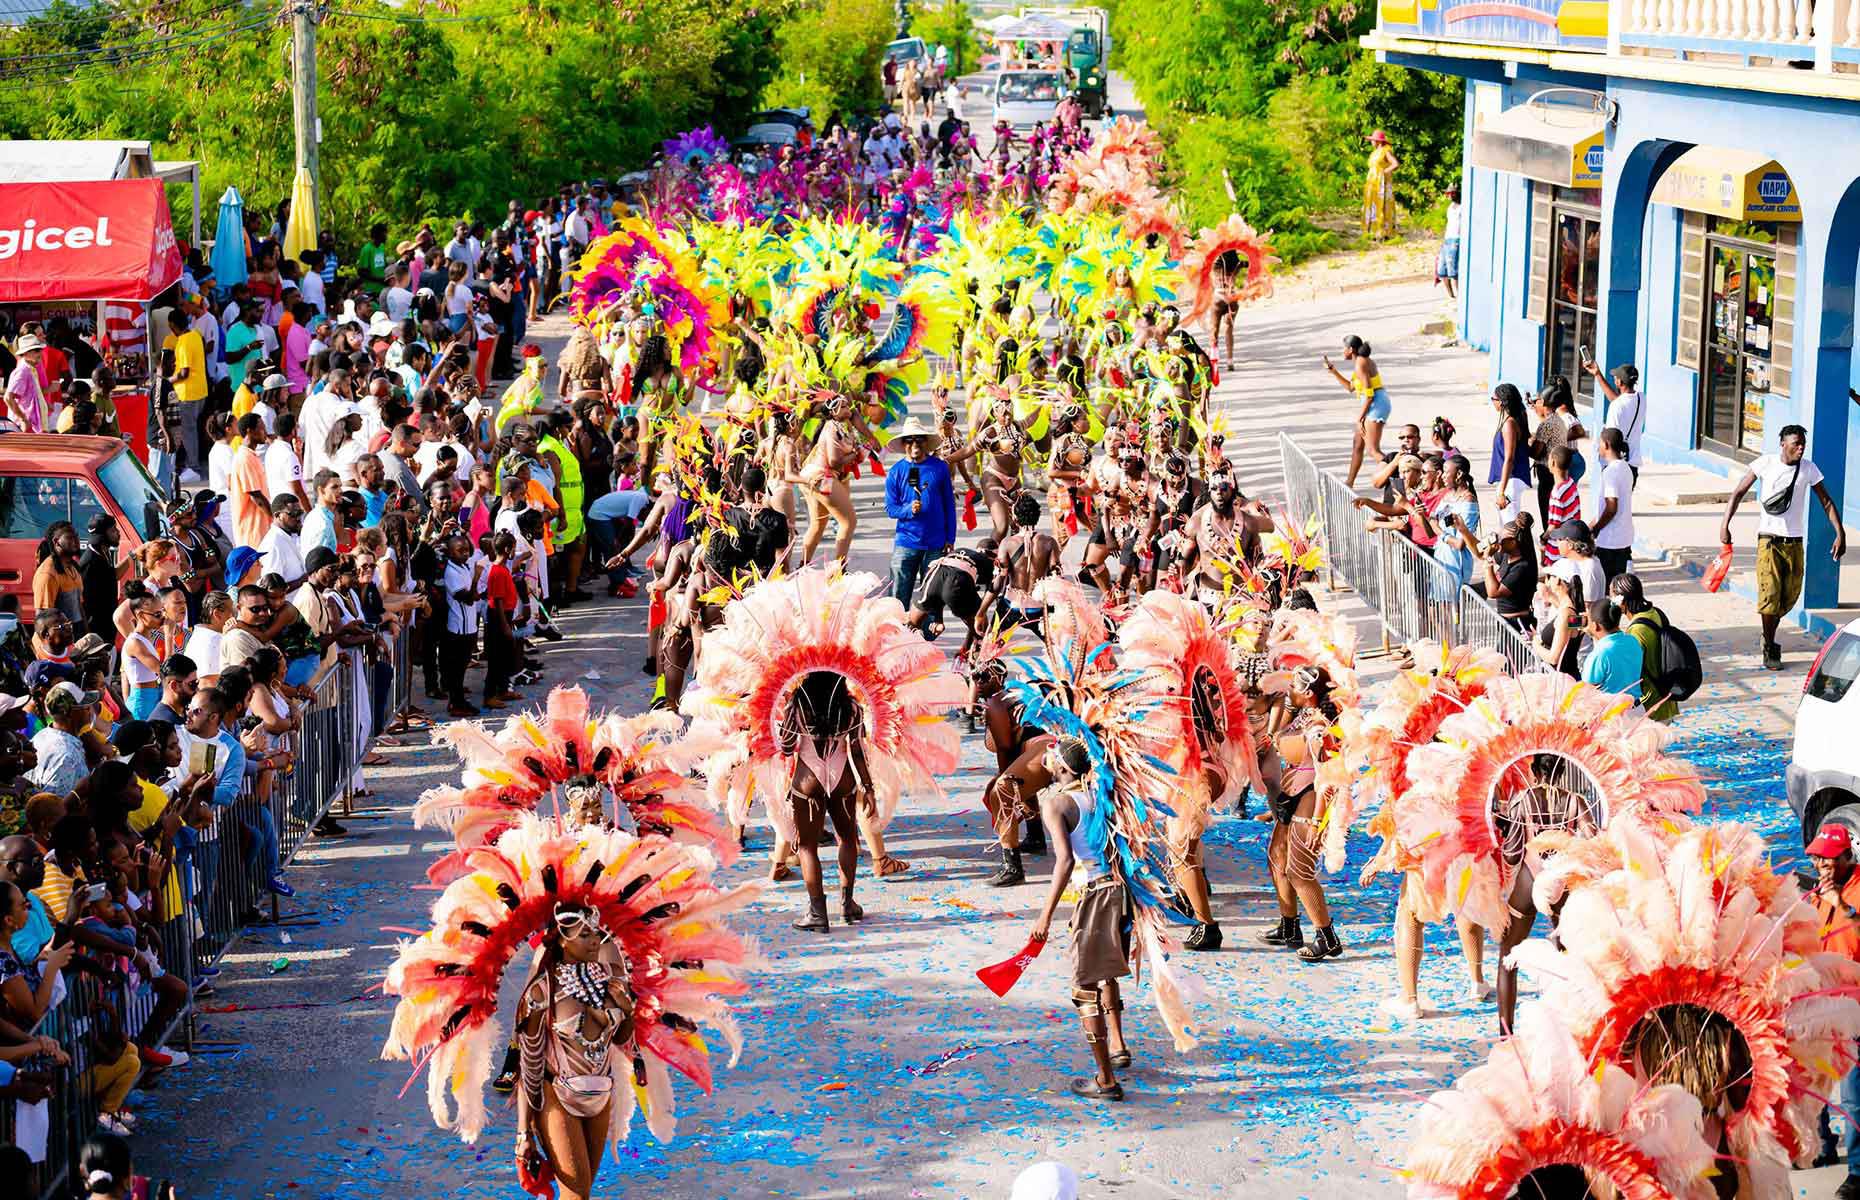 <p>Music fans should head here in March for the annual Moonsplash festival – it's been taking place since the 1990s, featuring a line-up of local reggae artists. August's Anguilla Summer Festival (pictured), with its colorful parades and all-day beach party, is another reason to make the trip.</p>  <p><strong><a href="https://www.loveexploring.com/guides/88234/what-to-see-do-and-where-to-stay-on-anguilla-the-caribbean-island-unpsoiled">Discover more things to see, eat and do on the isle of Anguilla with our guide</a></strong></p>